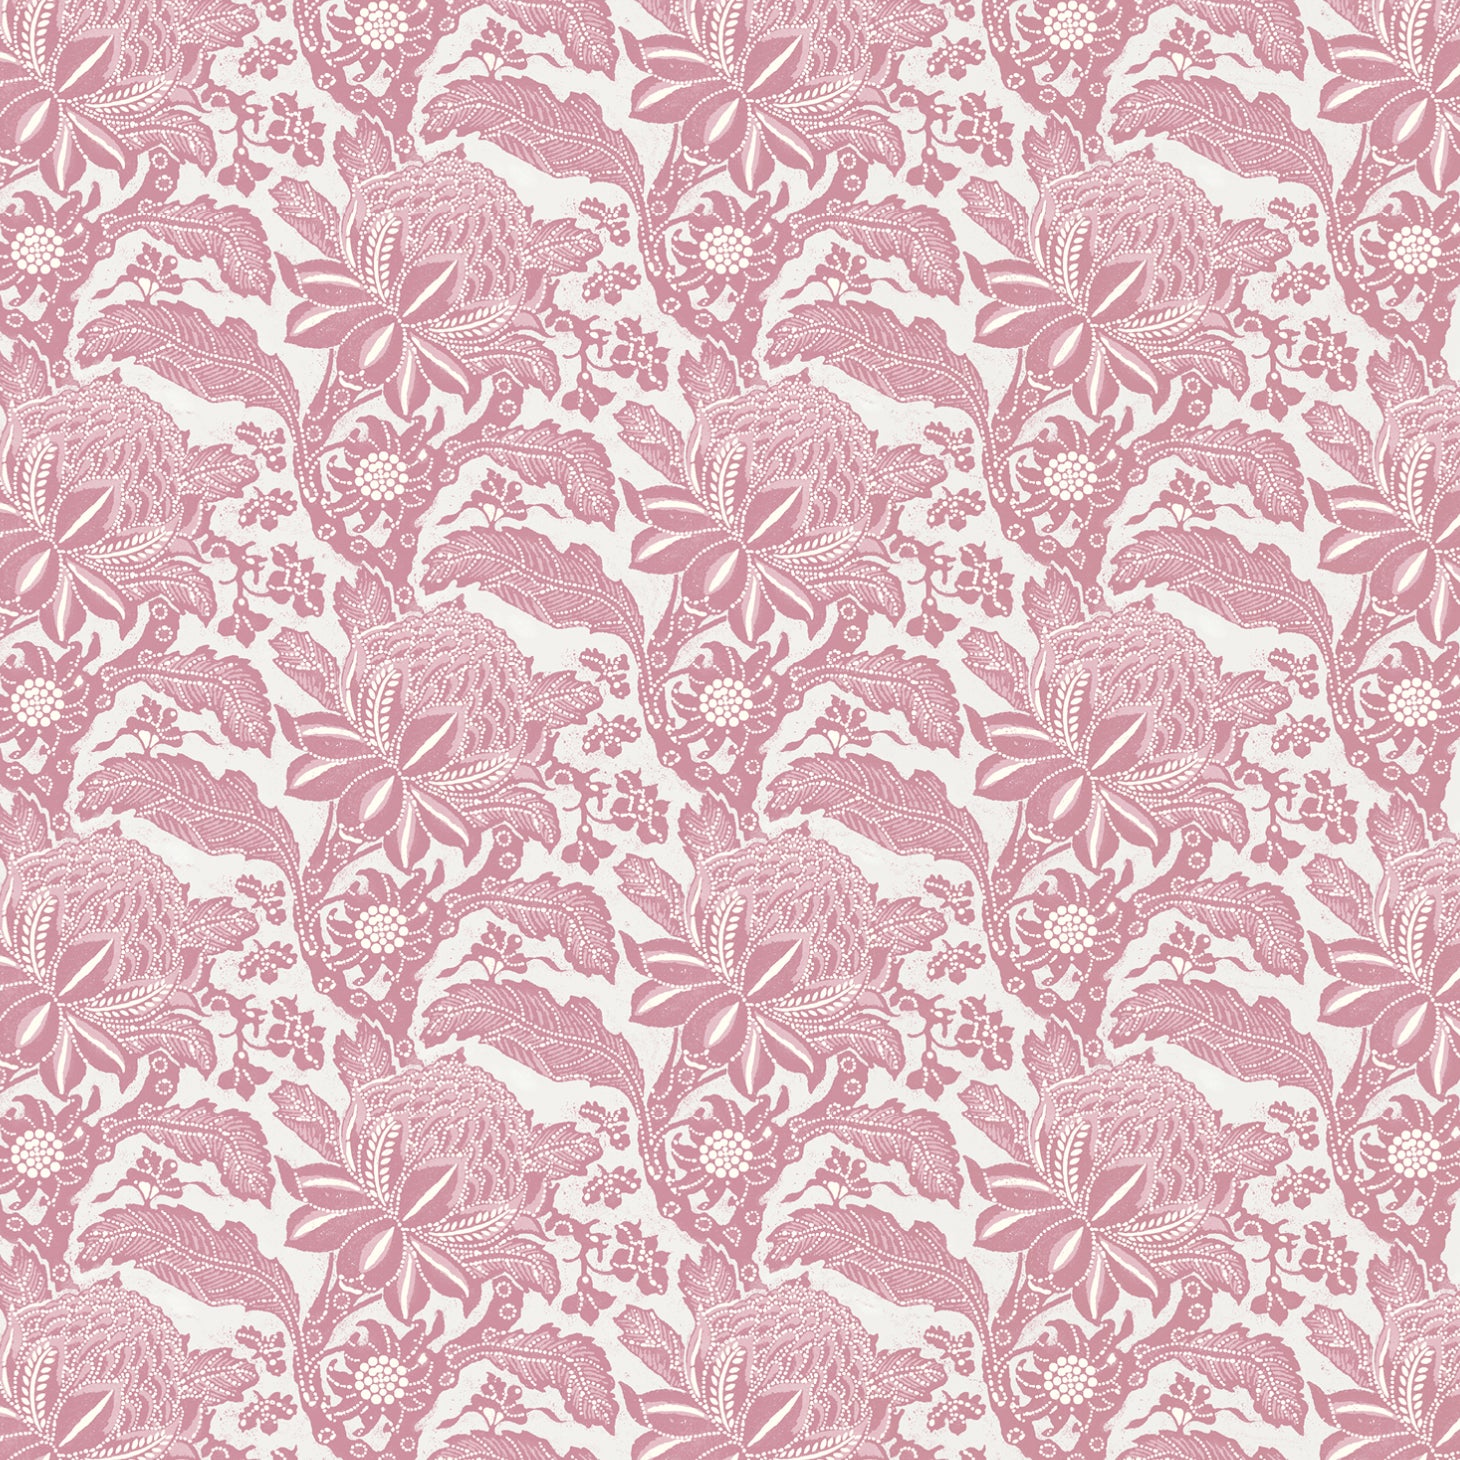 Detail of wallpaper in a repeating botanical print in pink on a white field.